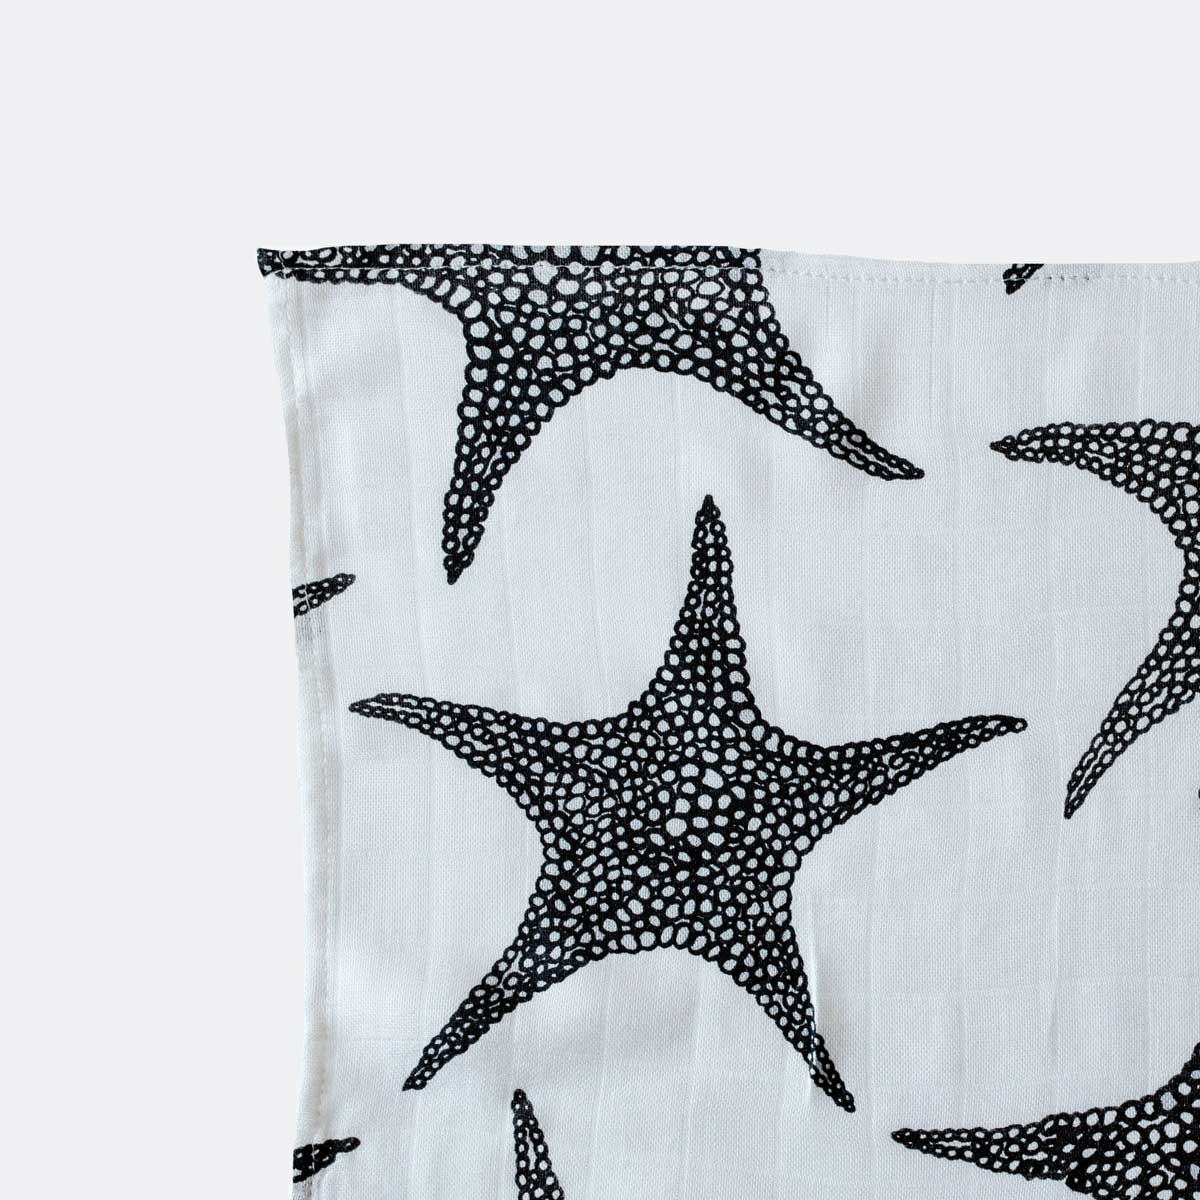 Keith Haring Pop Art Print Muslin Square crop edge detail product shot set in color Black & White animal print by Etta Loves for South Hous.